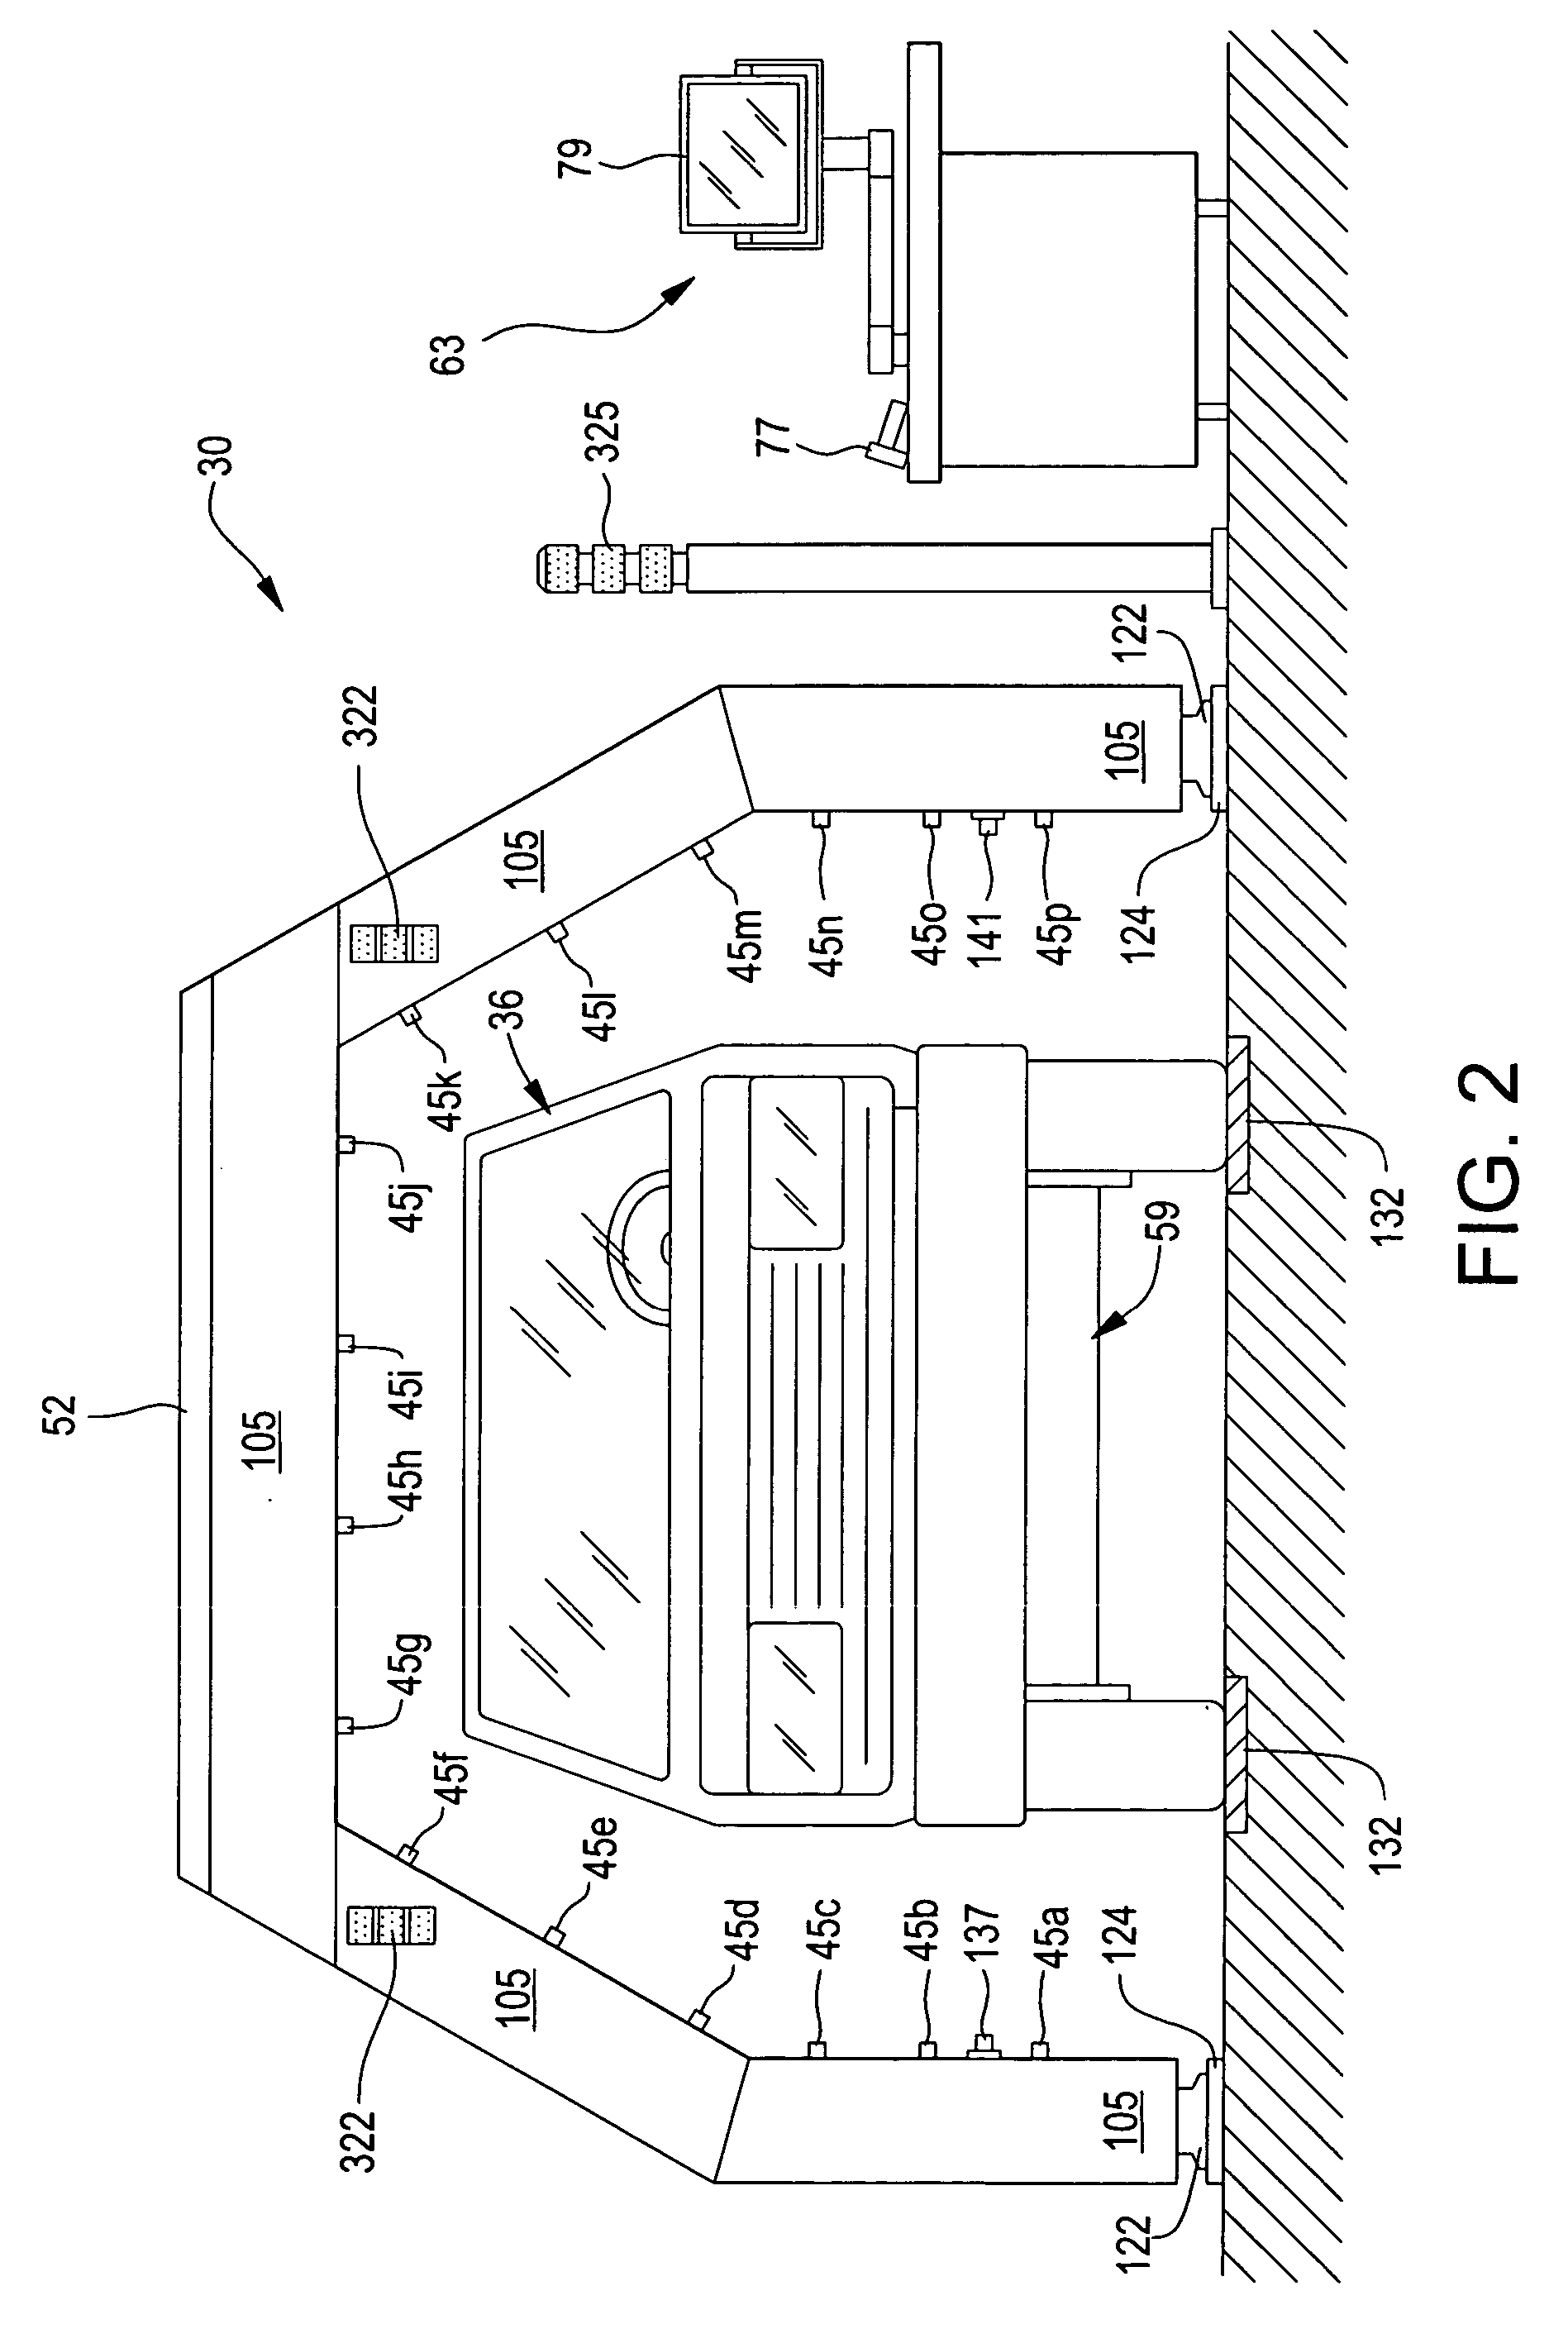 System and method for detecting leaks in sealed compartments